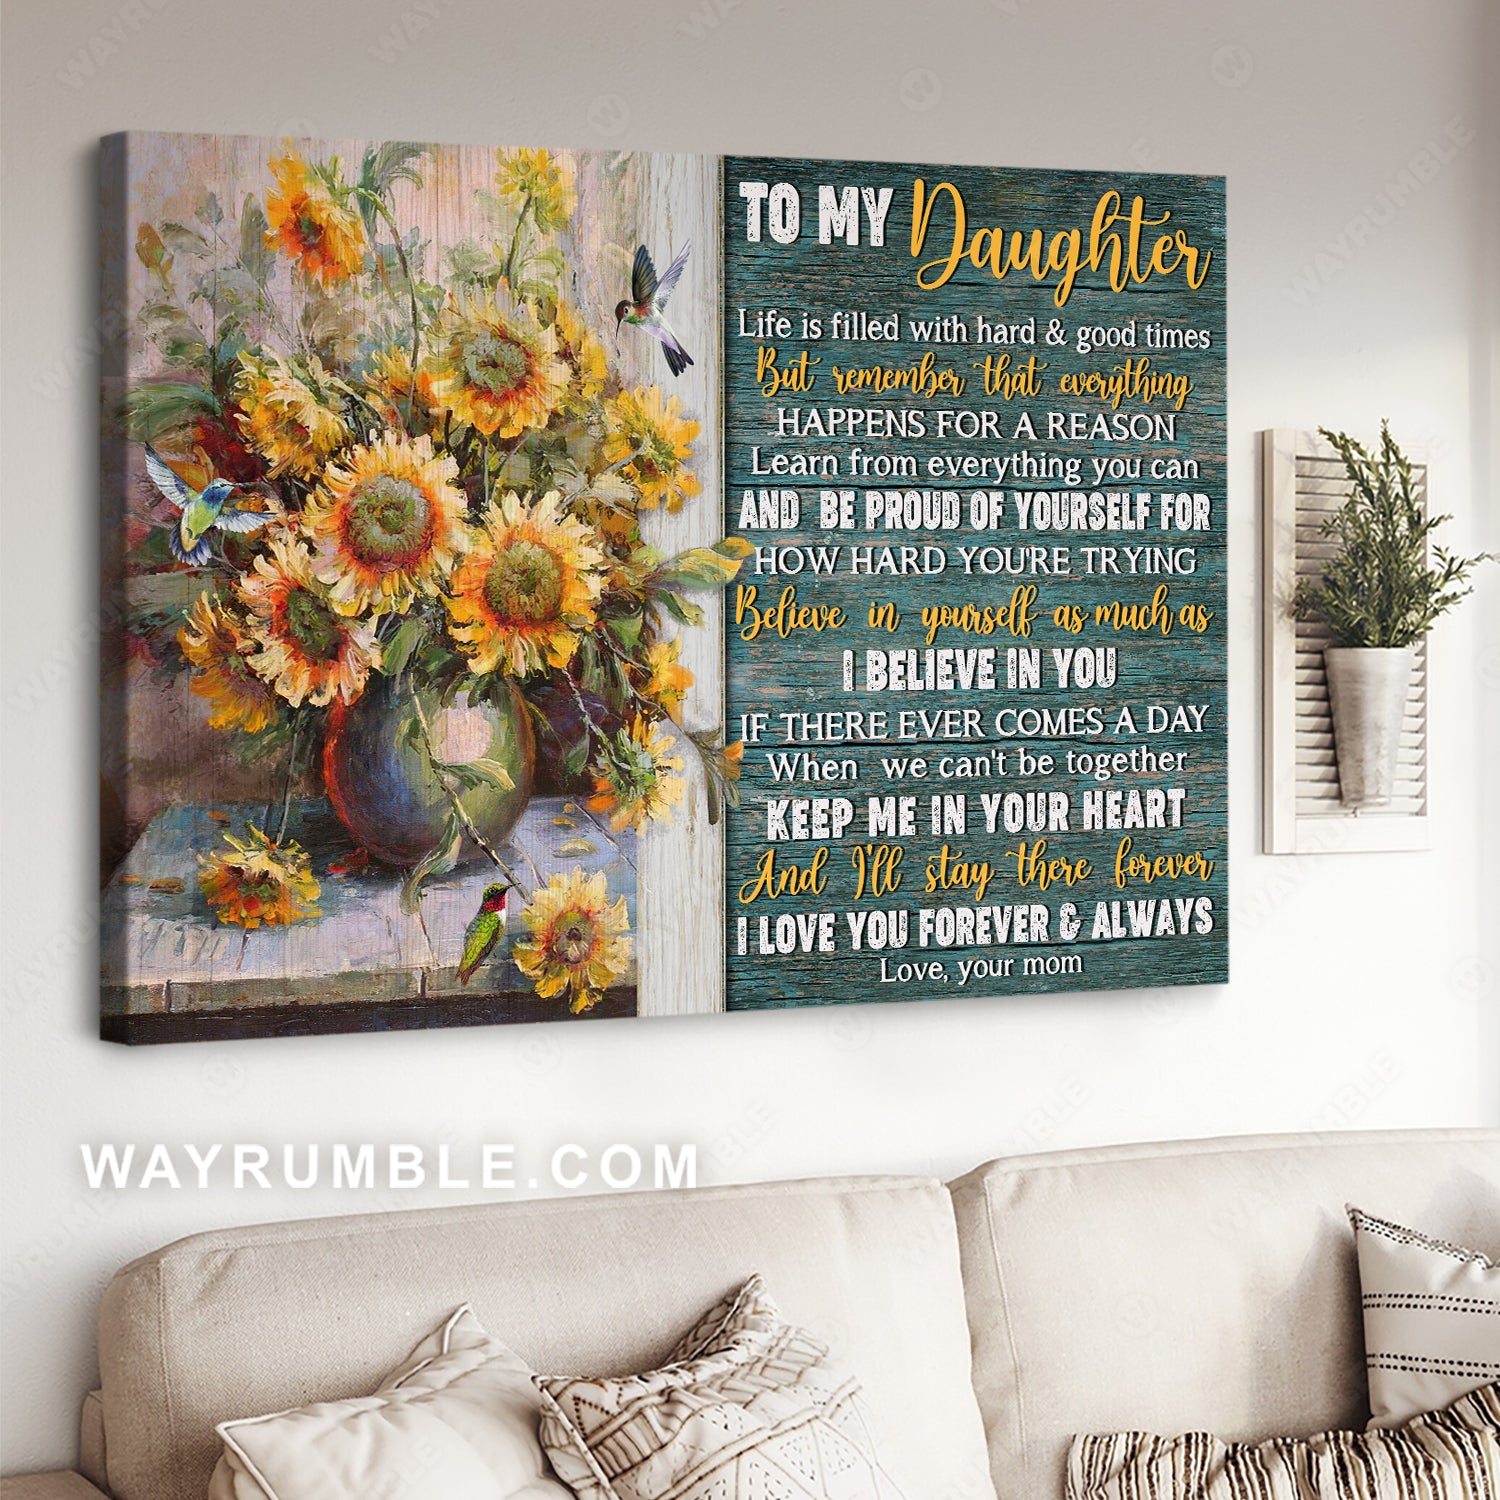 Mom to daughter, Sunflower vase, Still life drawing, I believe in you - Family Landscape Canvas Prints, Wall Art